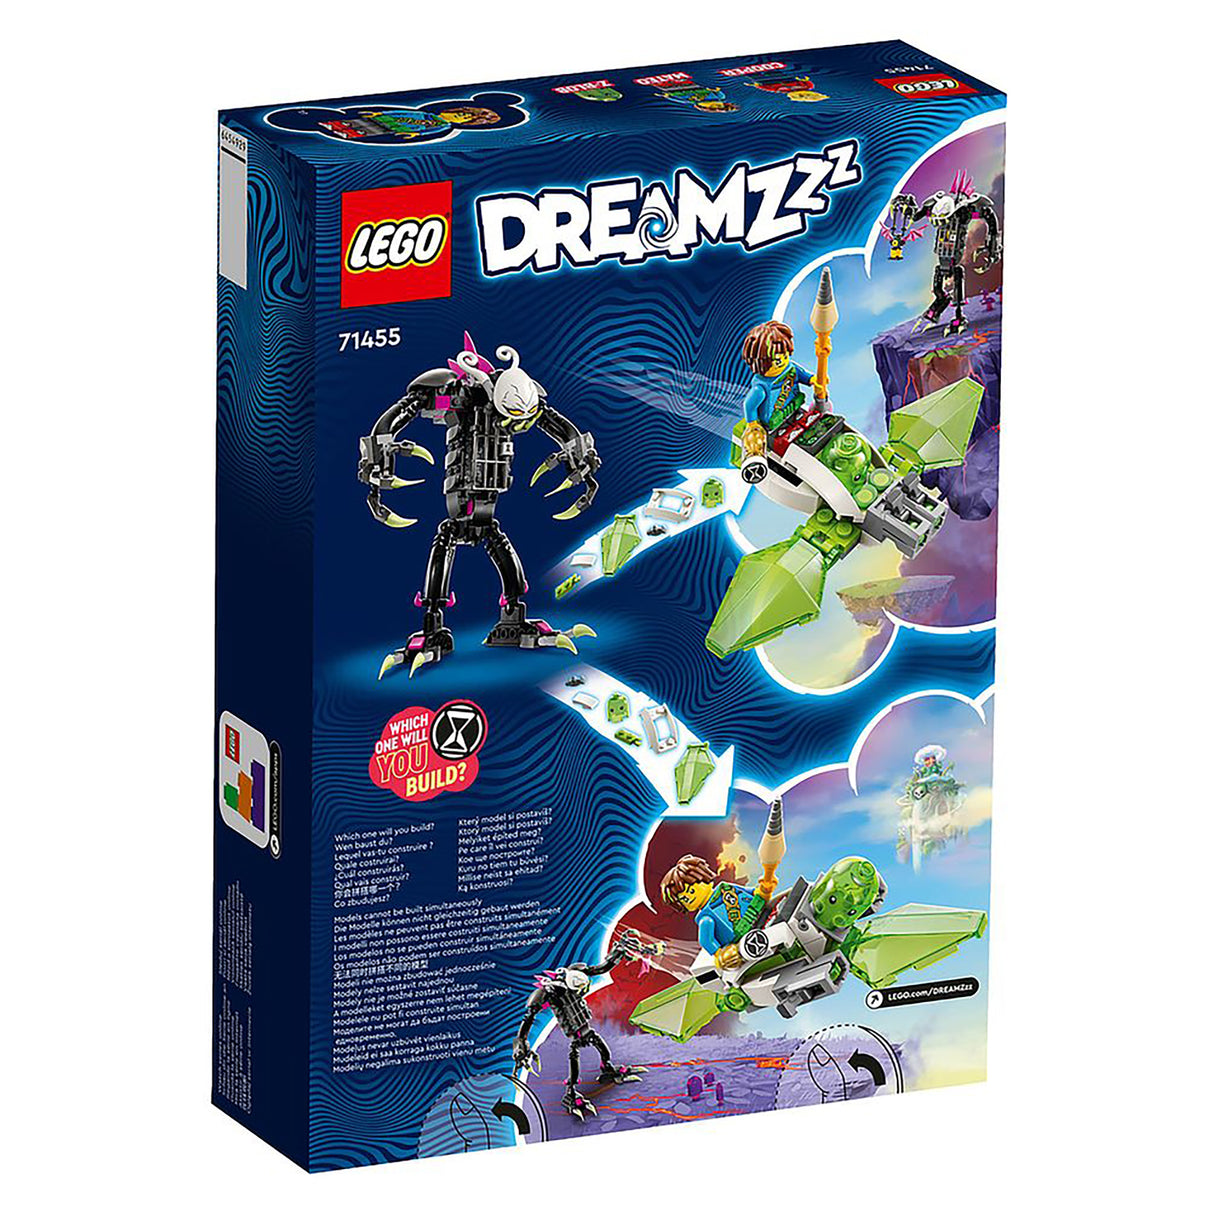 LEGO DREAMZzz Grimkeeper the Cage Monster 71455 (274 pieces)